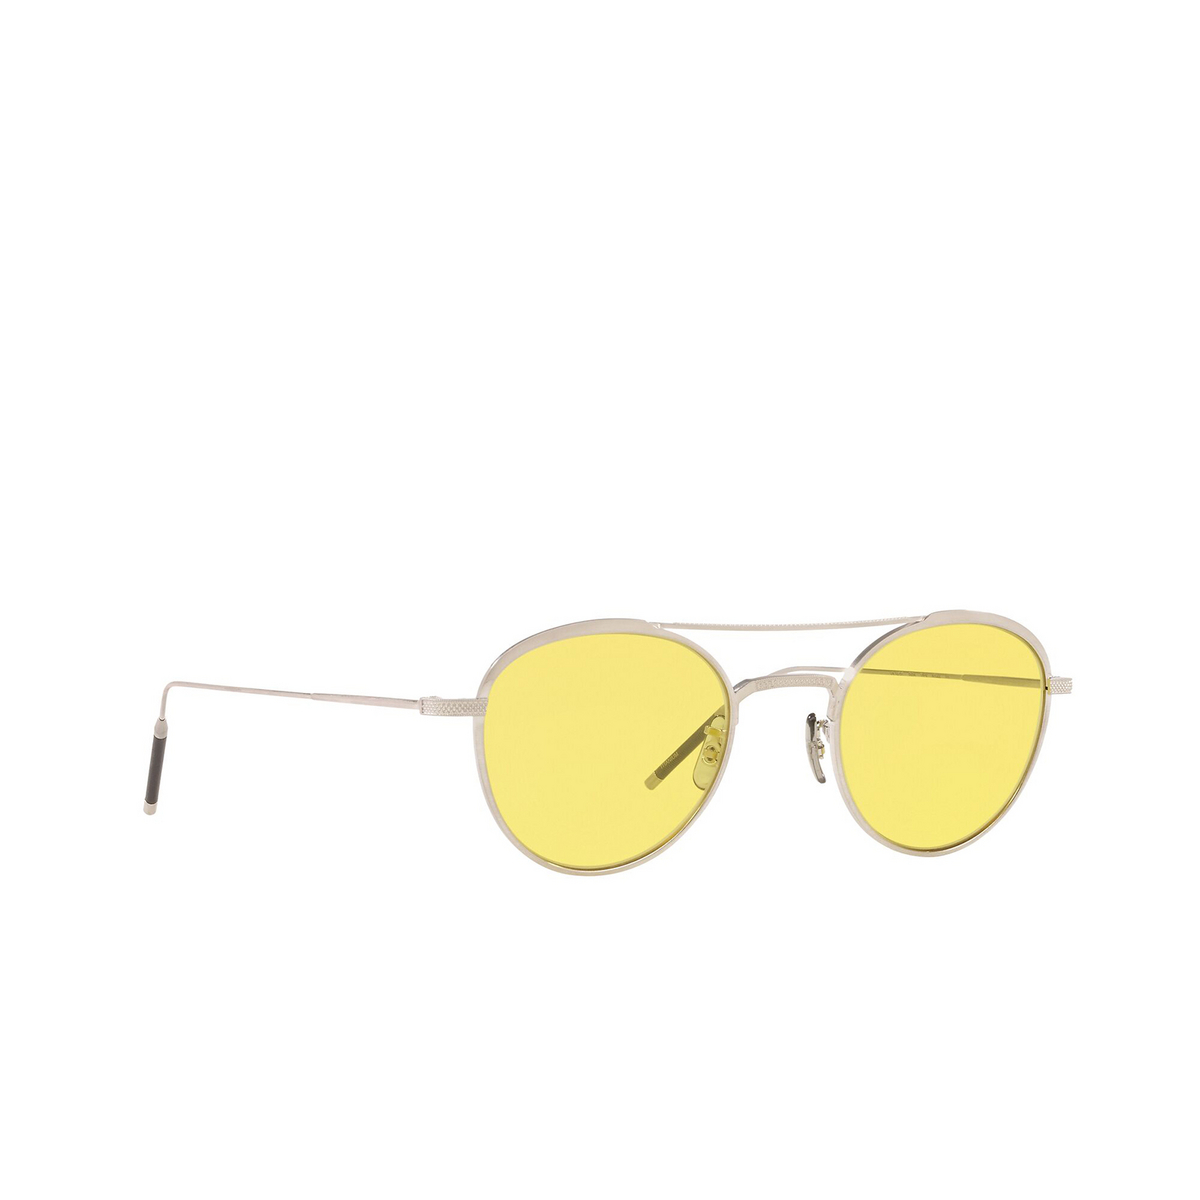 Oliver Peoples® Round Eyeglasses: Tk-2 OV1275T color Brushed Silver 5254 - three-quarters view.